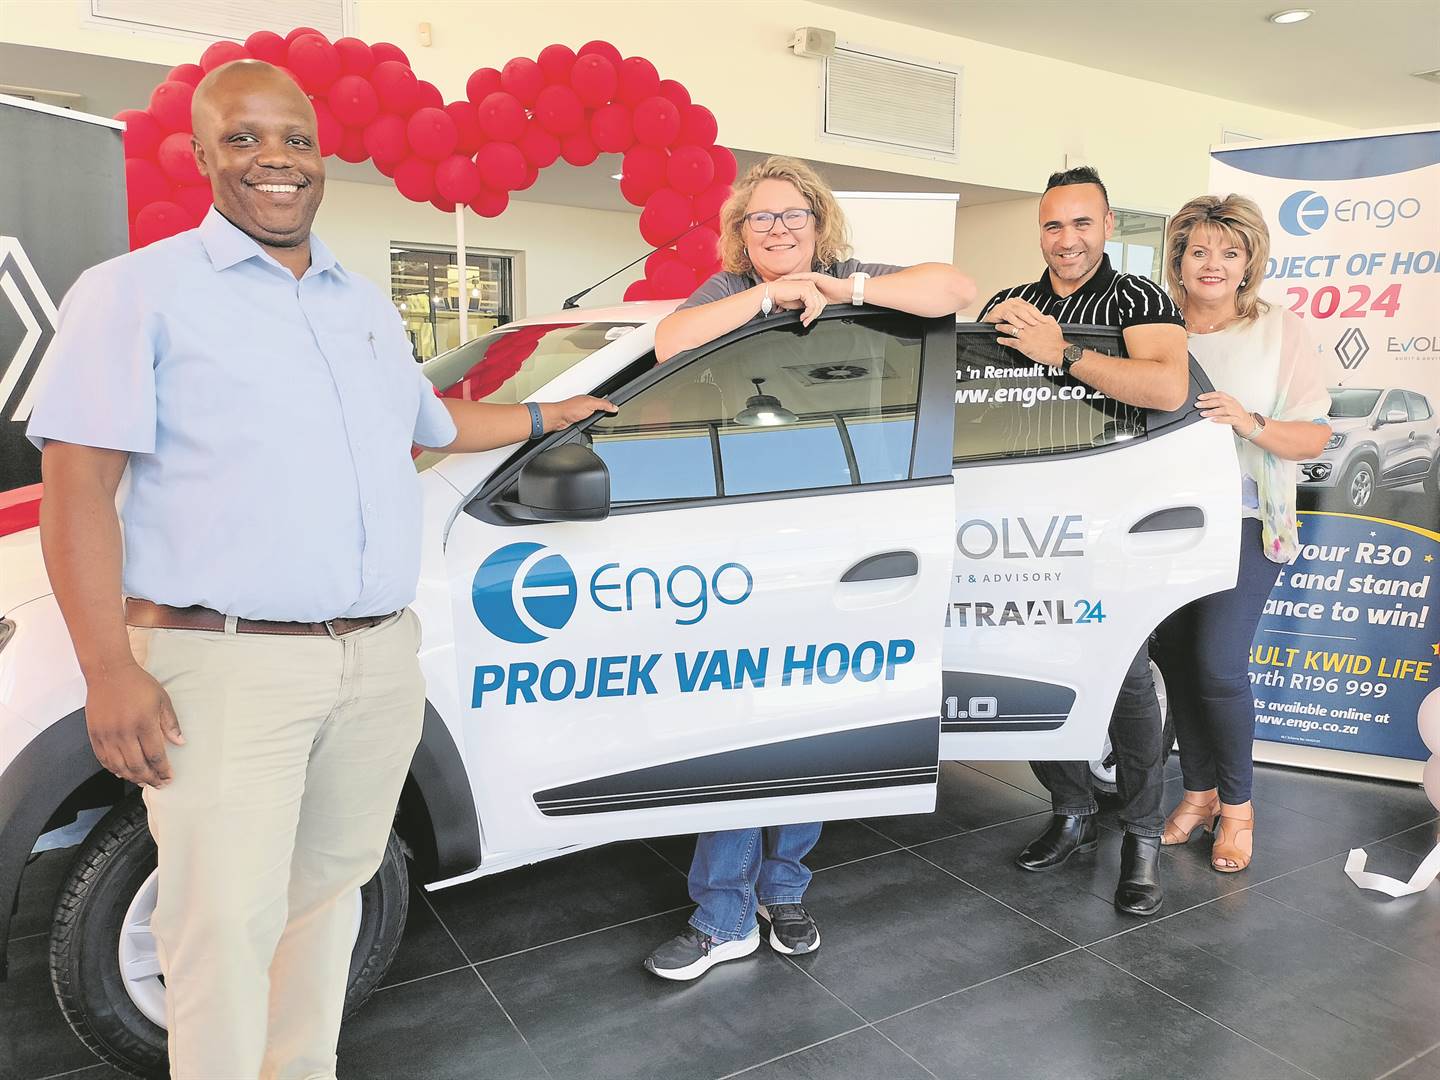 At the launch of Engo’s Project of Hope for 2024, with the Renault Kwid Life, are from the left Thabo Mokoena (dealer principal at Renault Bloemfontein), Carolien Koen (Evolve Audit and Advisory), De Wet Claassens (chief executive director of Engo) and Jeannine van Zyl (general manager of Central24).Photo: Lientjie Mentz